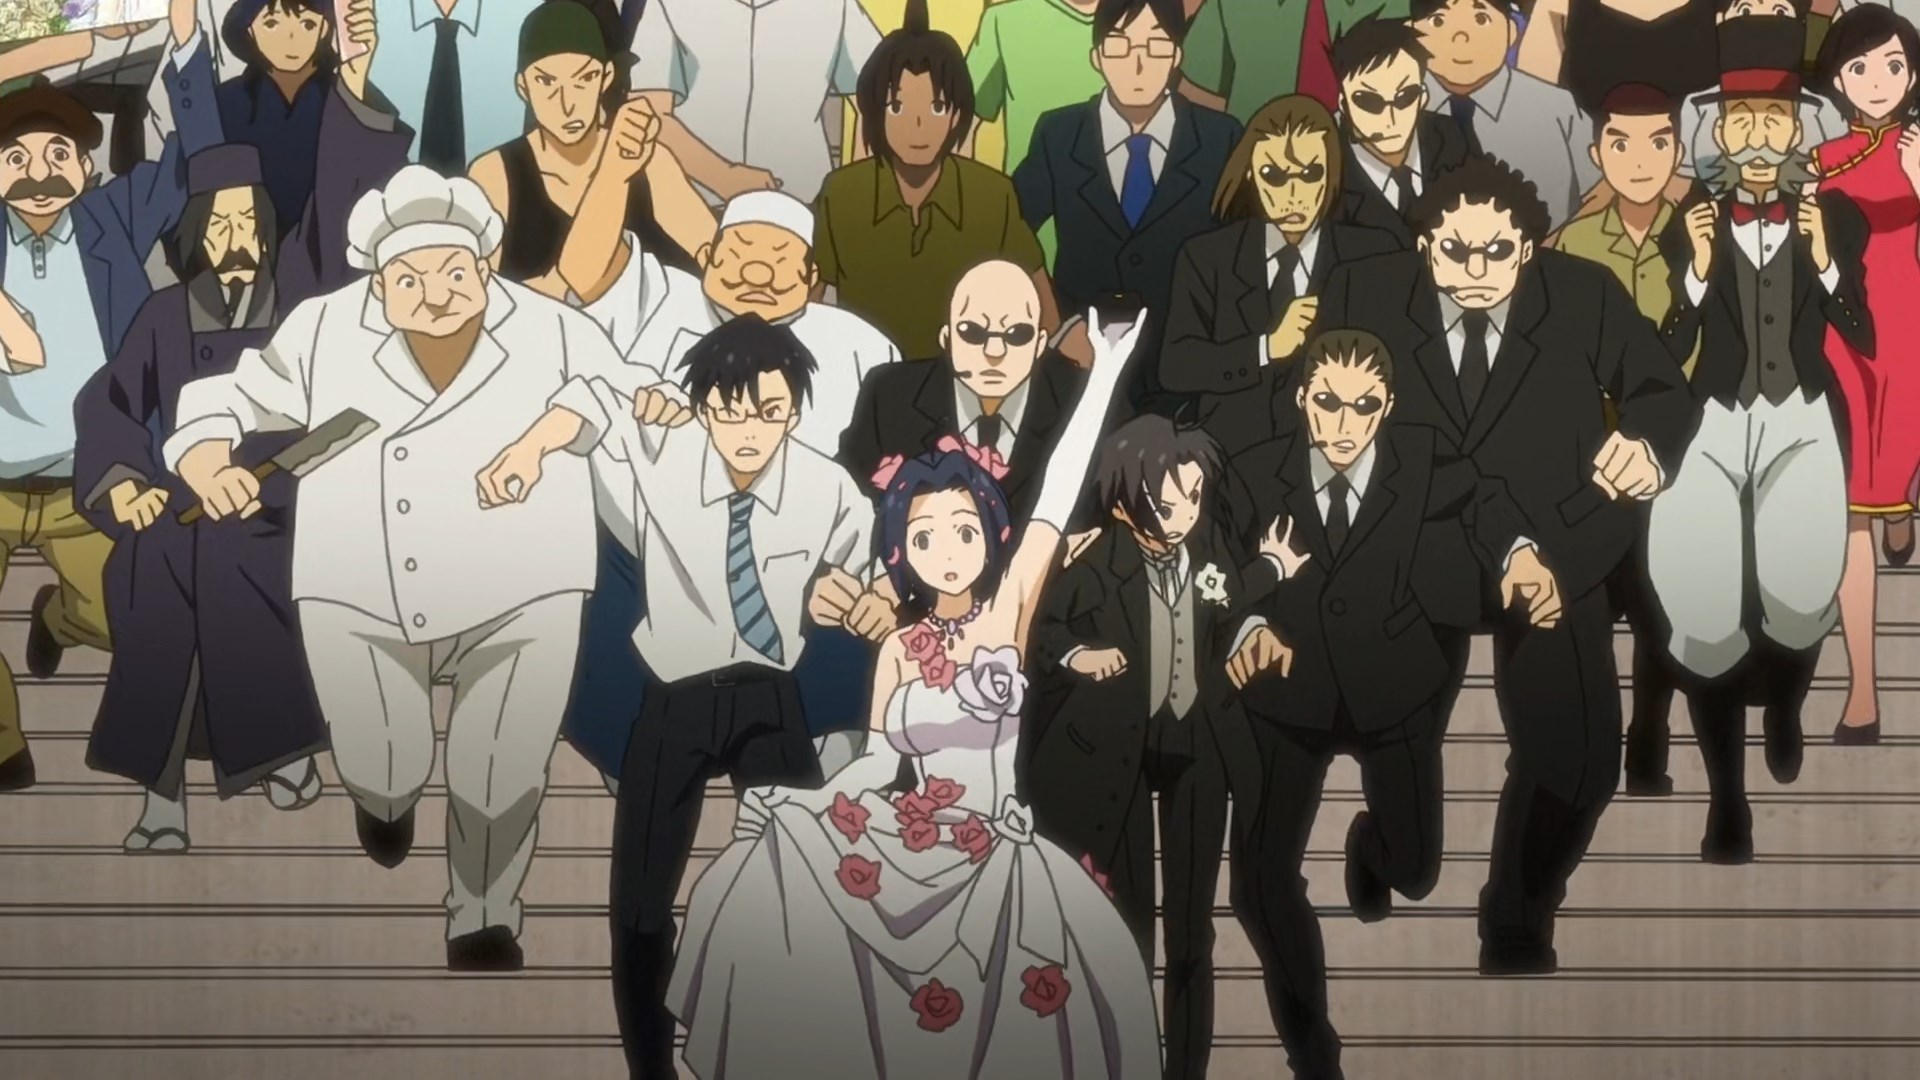 Everybody is chasing Azusa in her bridal wear